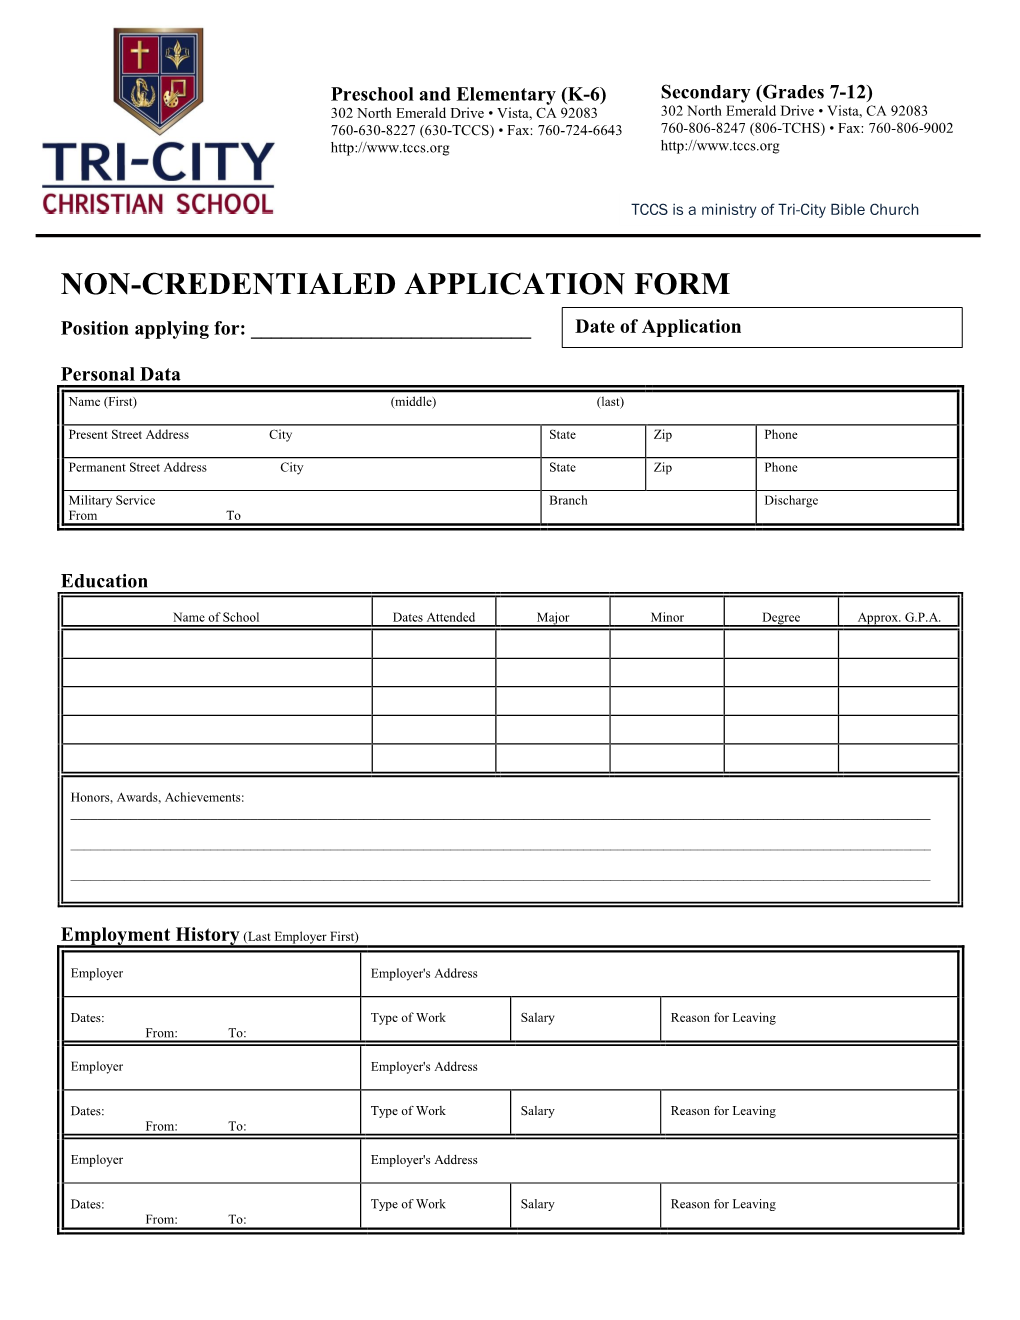 Non-Credentialed Application Form